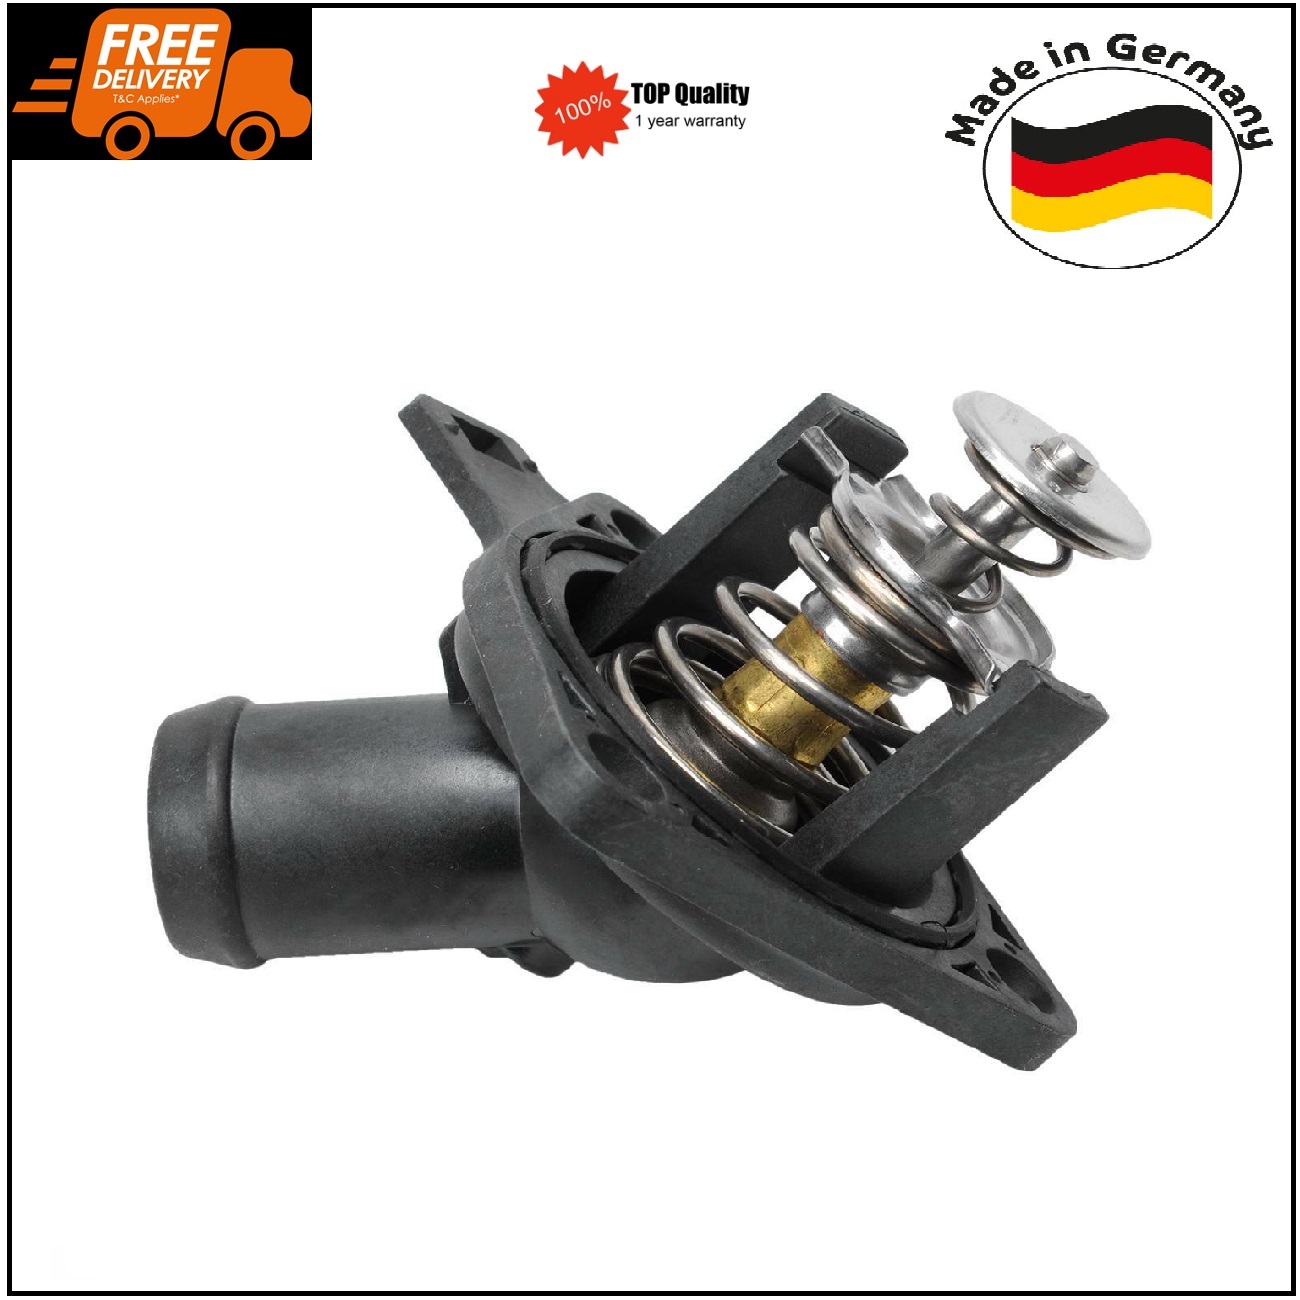 Coolant Thermostat for Honda Accord Euro Civic Type R CR-V 19301-RAF-003 German Made